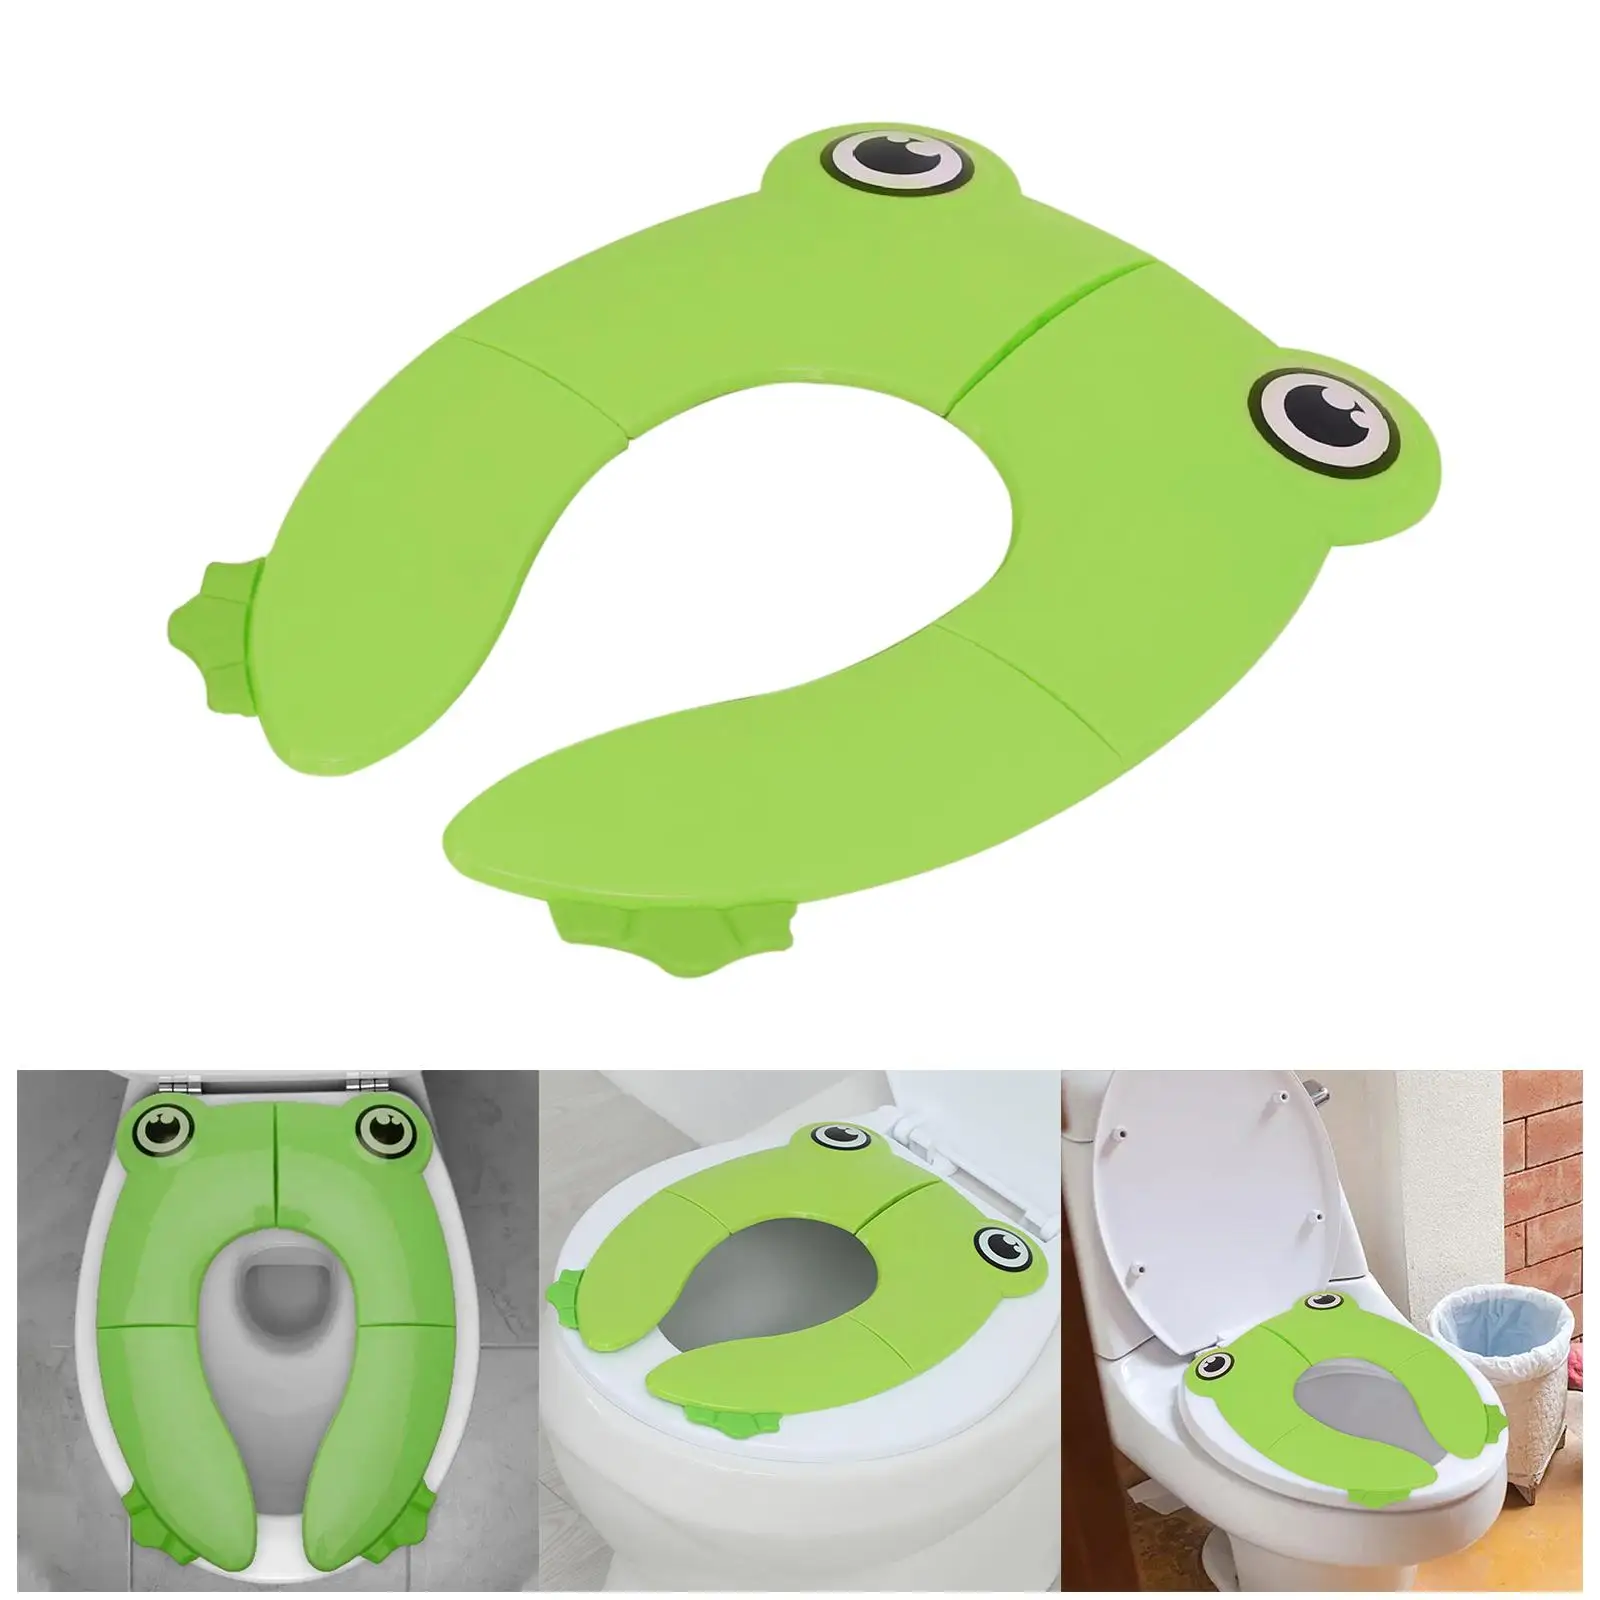 Foldable Potty Seat Pad with Storage Bag for Home Use Traveling Toddler